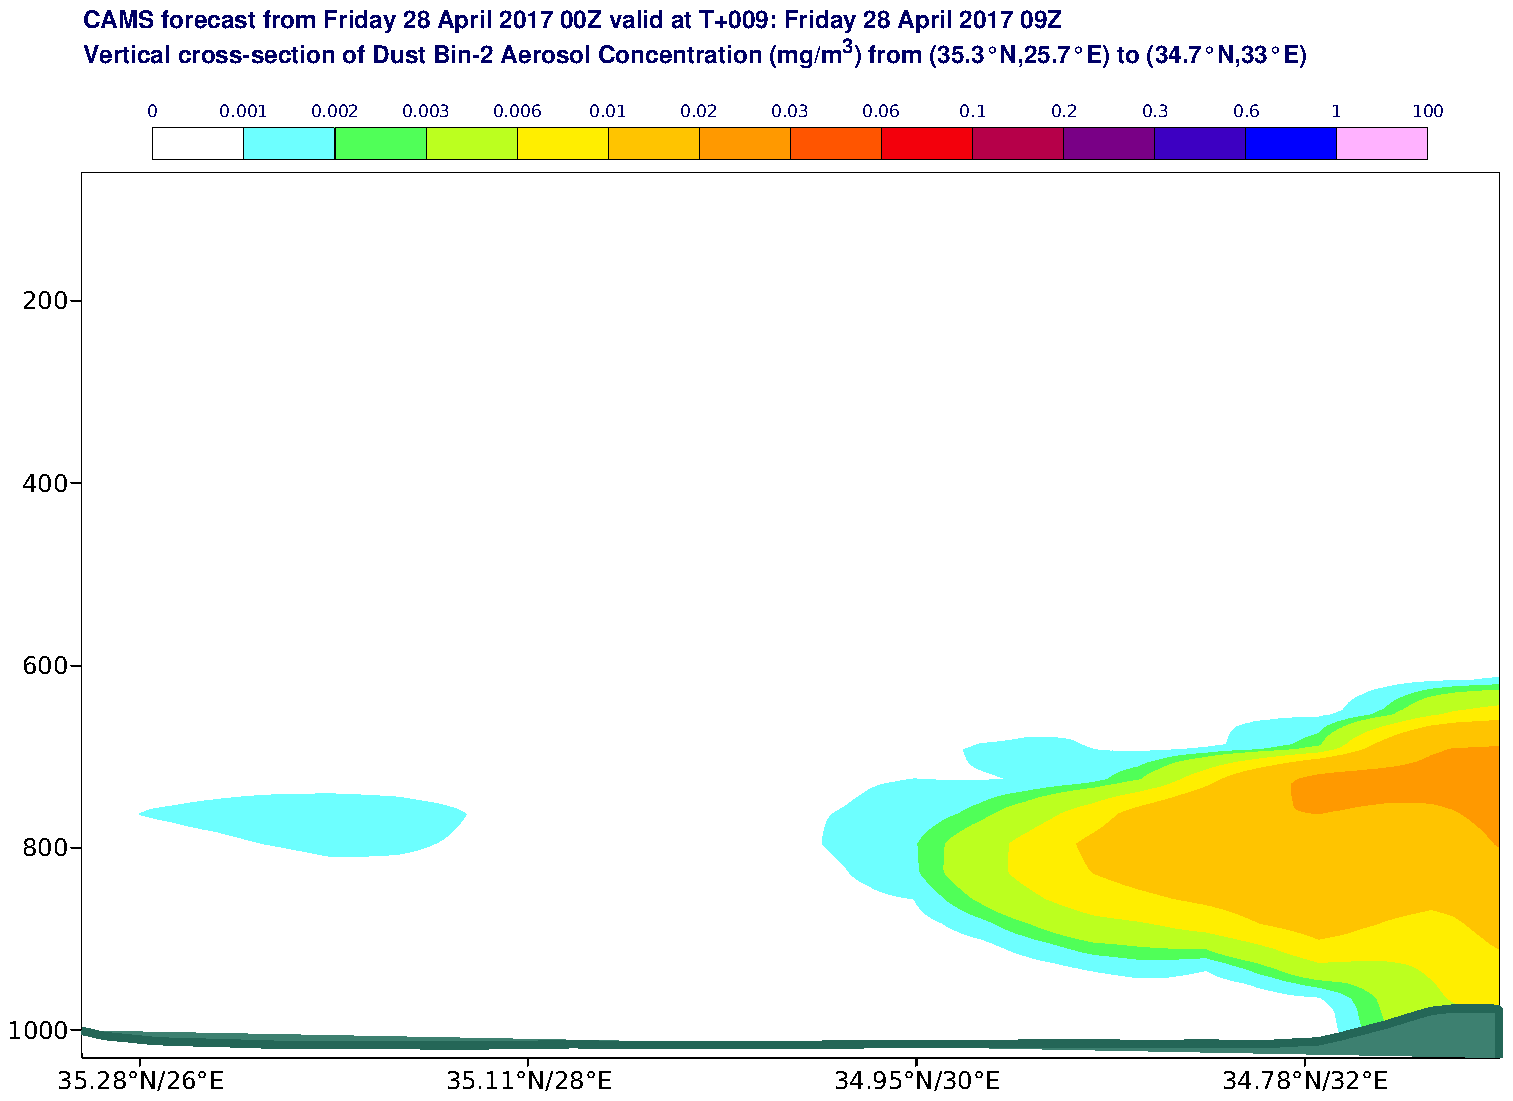 Vertical cross-section of Dust Bin-2 Aerosol Concentration (mg/m3) valid at T9 - 2017-04-28 09:00